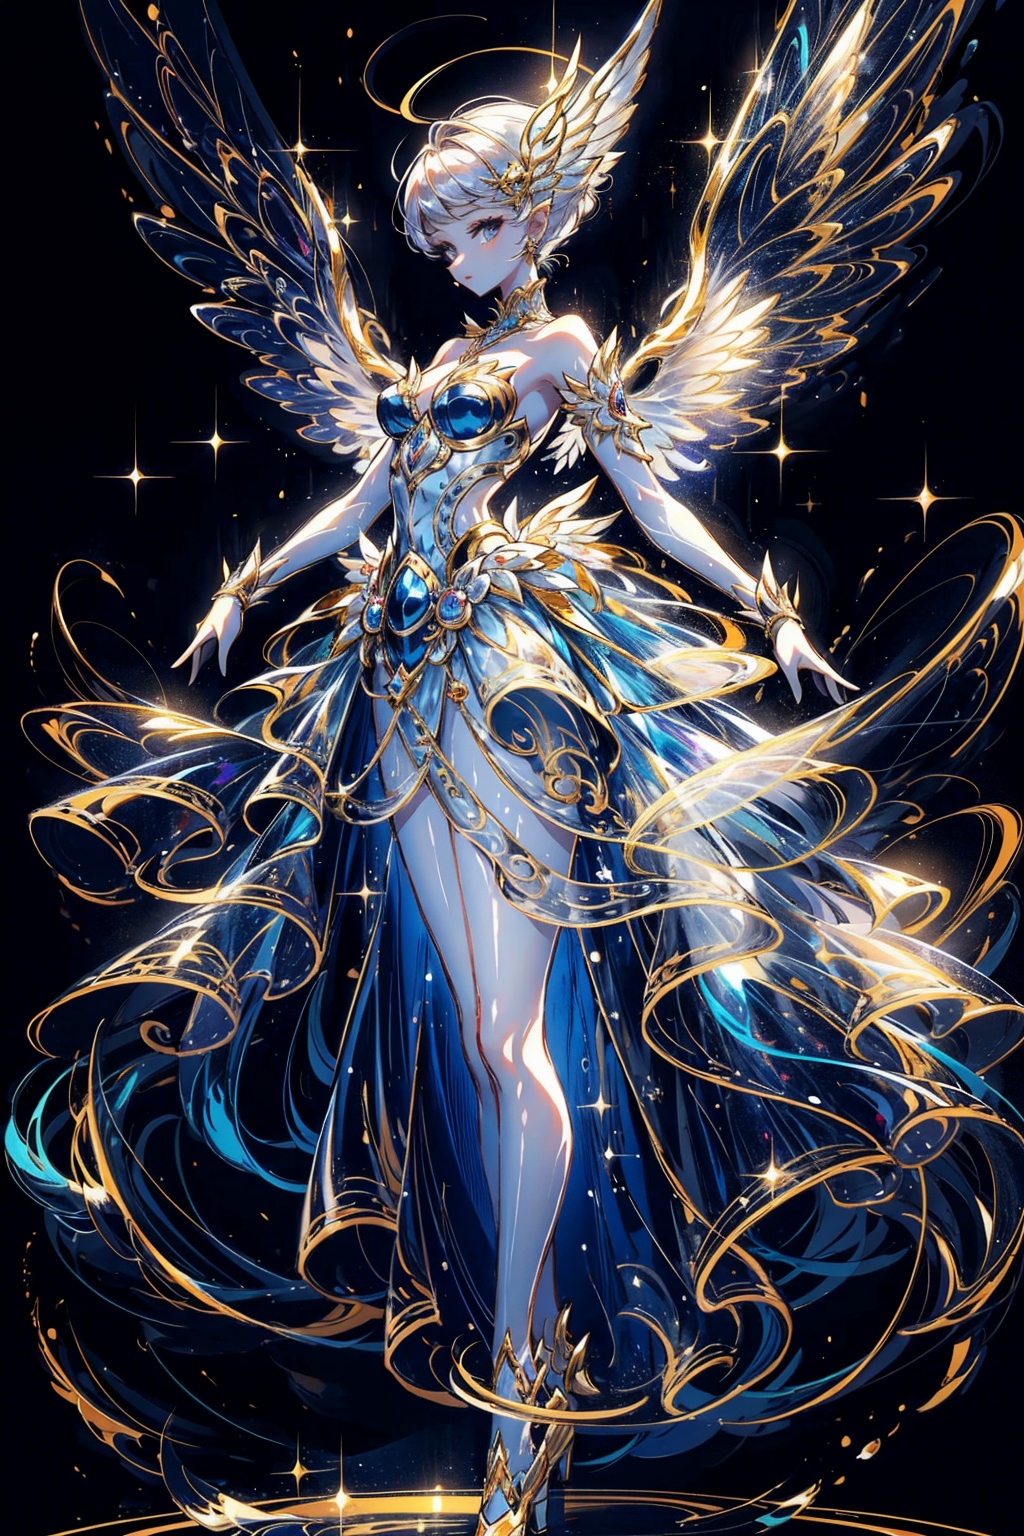  Best quality, 8k, cg, 
a close up of a person in a dress with a light on, astral fairy, fairy dancing, space flower fairy, ethereal essence, ethereal wings, dancing gracefully, magical fairy floating in space, ethereal!!!!!!!, astral ethereal, faerie, ethereal anime, fairy aesthetics, ethereal!!!, a stunning young ethereal figure, ethereal glow, ethereal angelic being of light